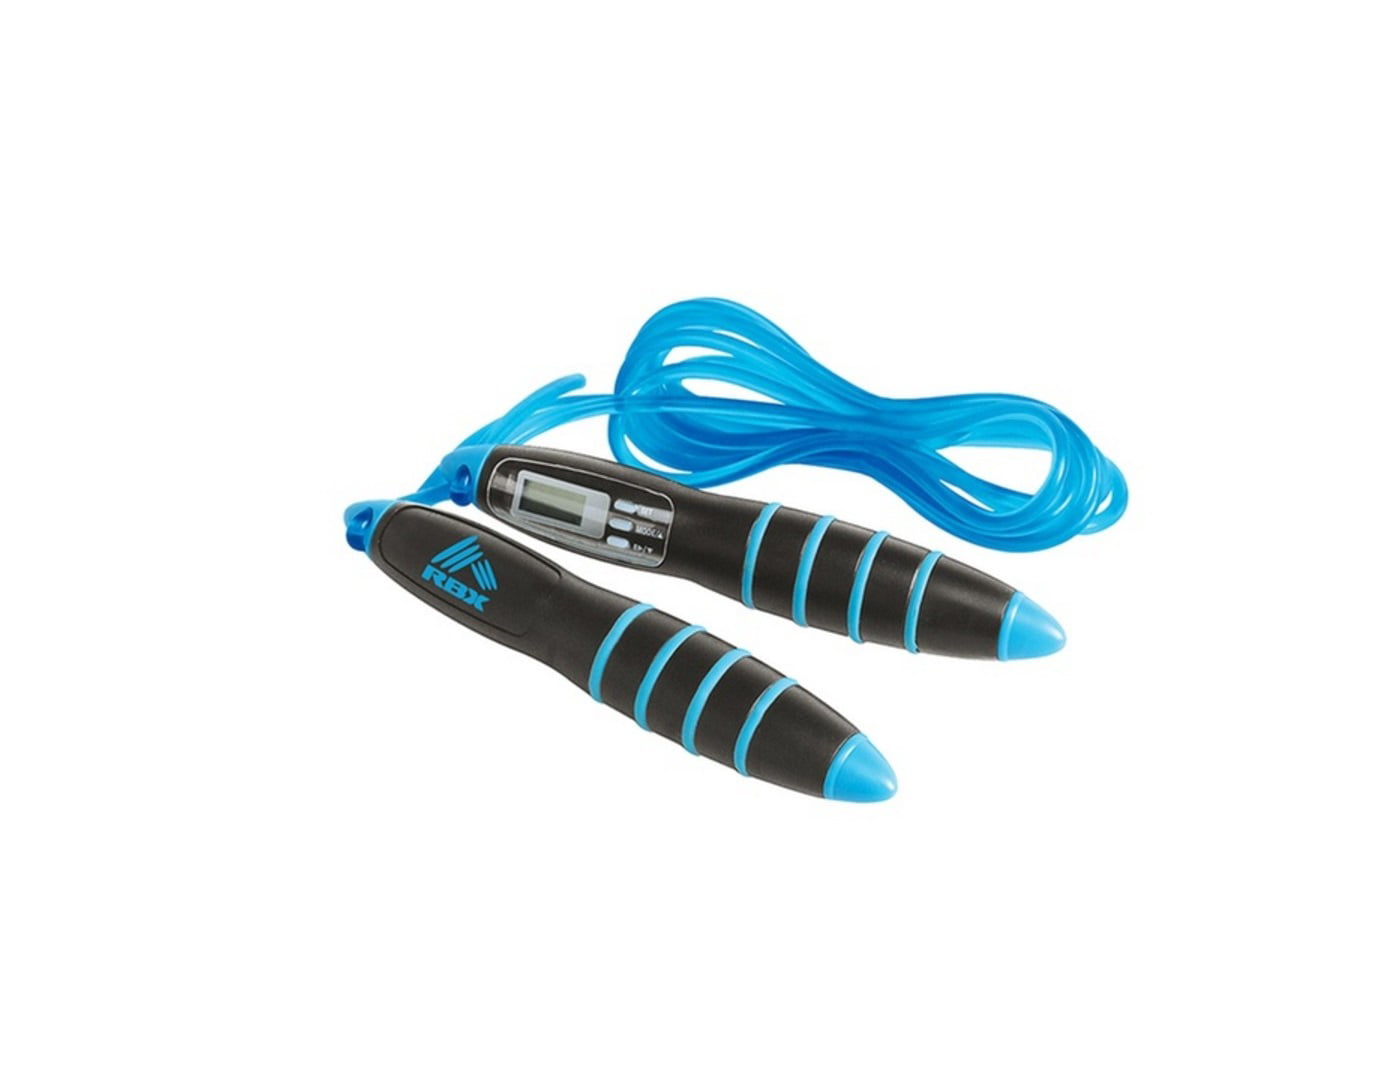 RBX RF-D2908G Portable Active Digital Jump Rope Digitally Counts and Tracks 